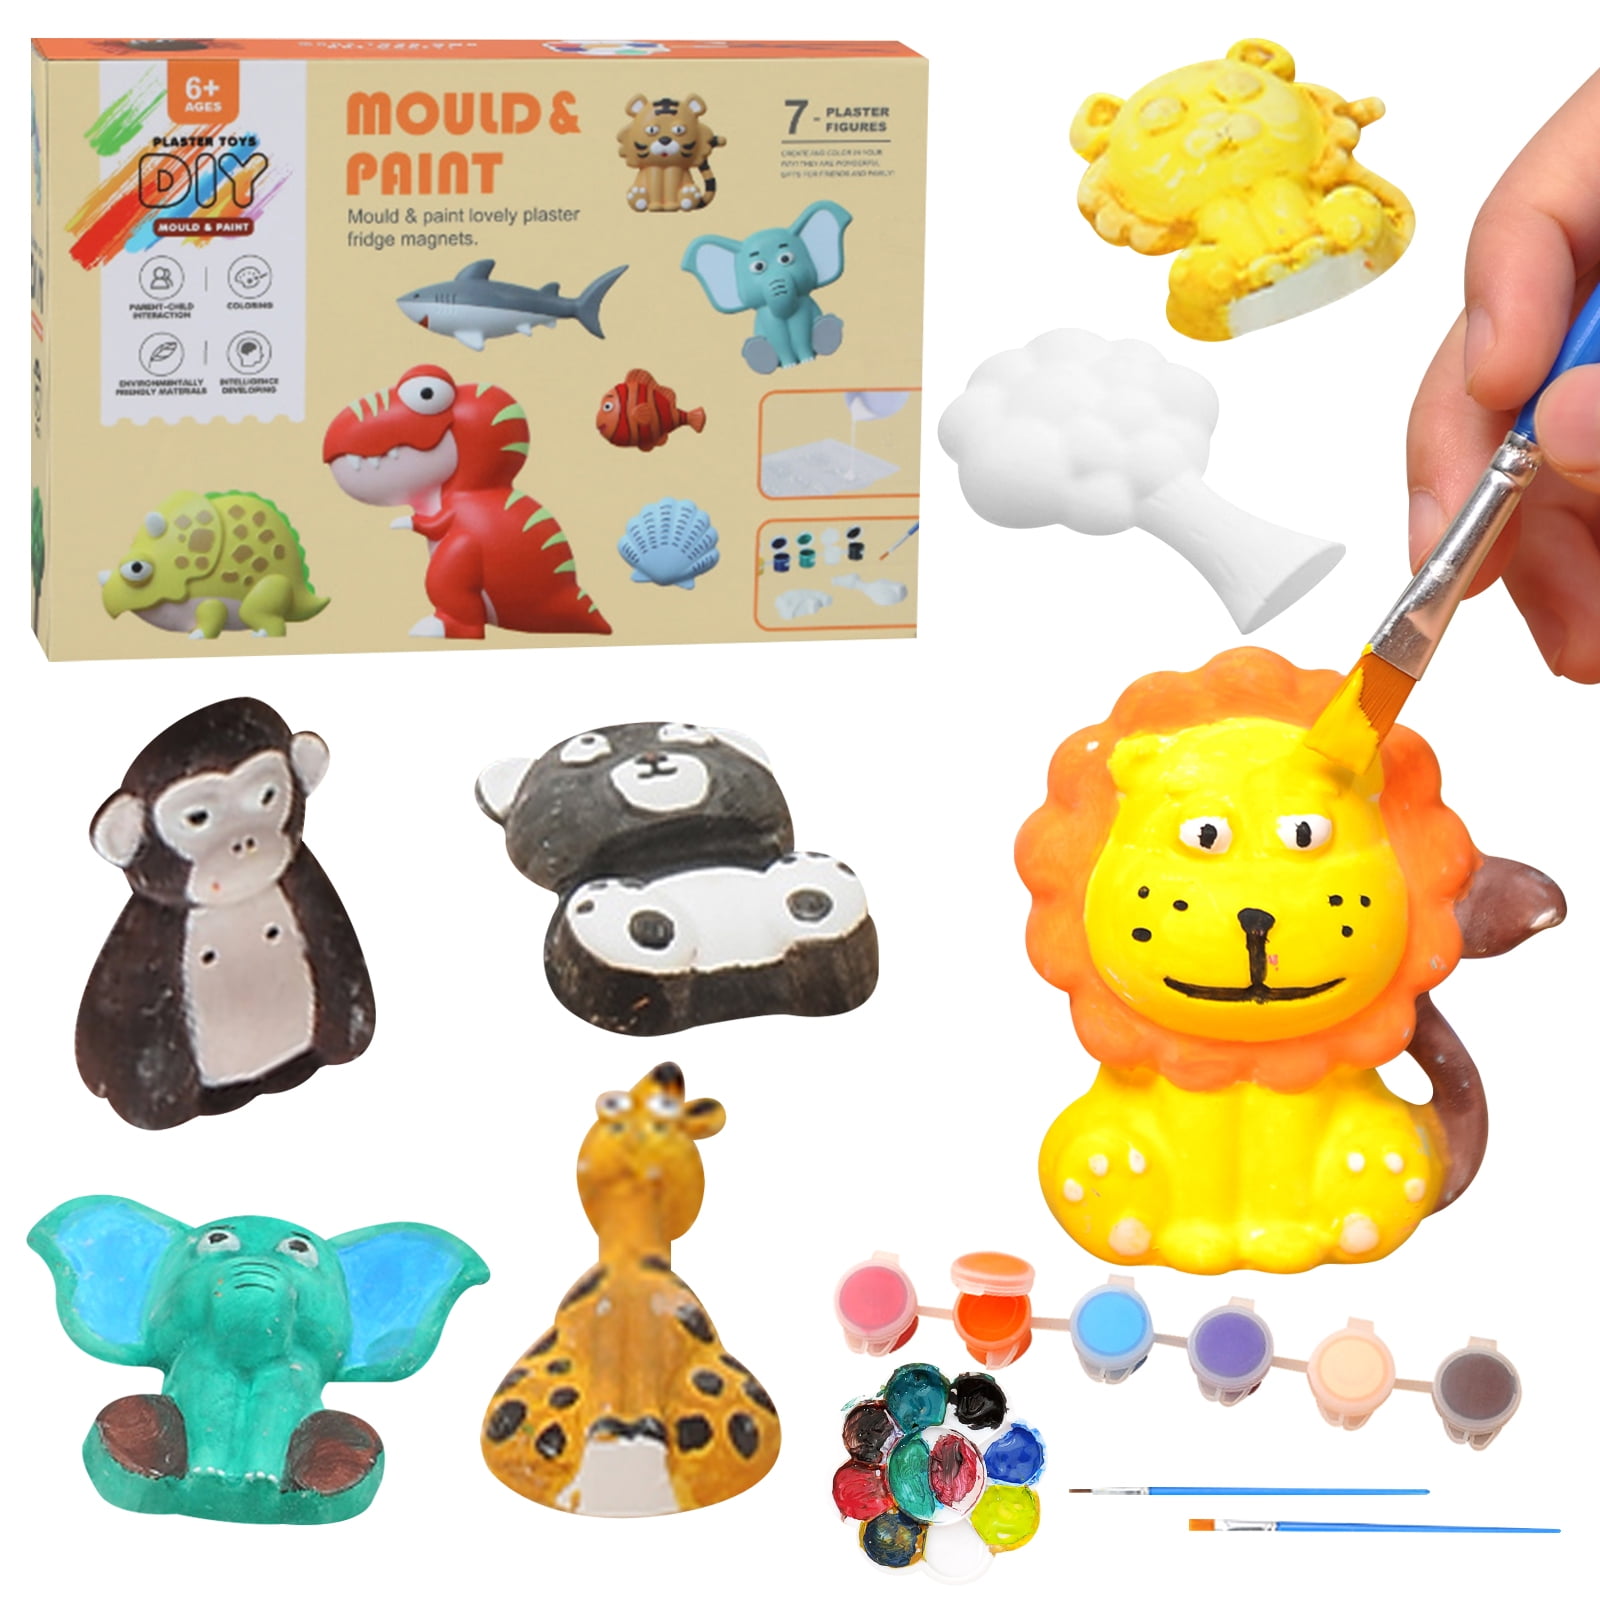  Funto Animal Painting Kit for Kids, Paint Your Own Figurines  with Magnet, 27 PCS Arts and Crafts Set, Ceramics to Paint, STEAM Projects  Creative Activity DIY Toys Gift for Boys 